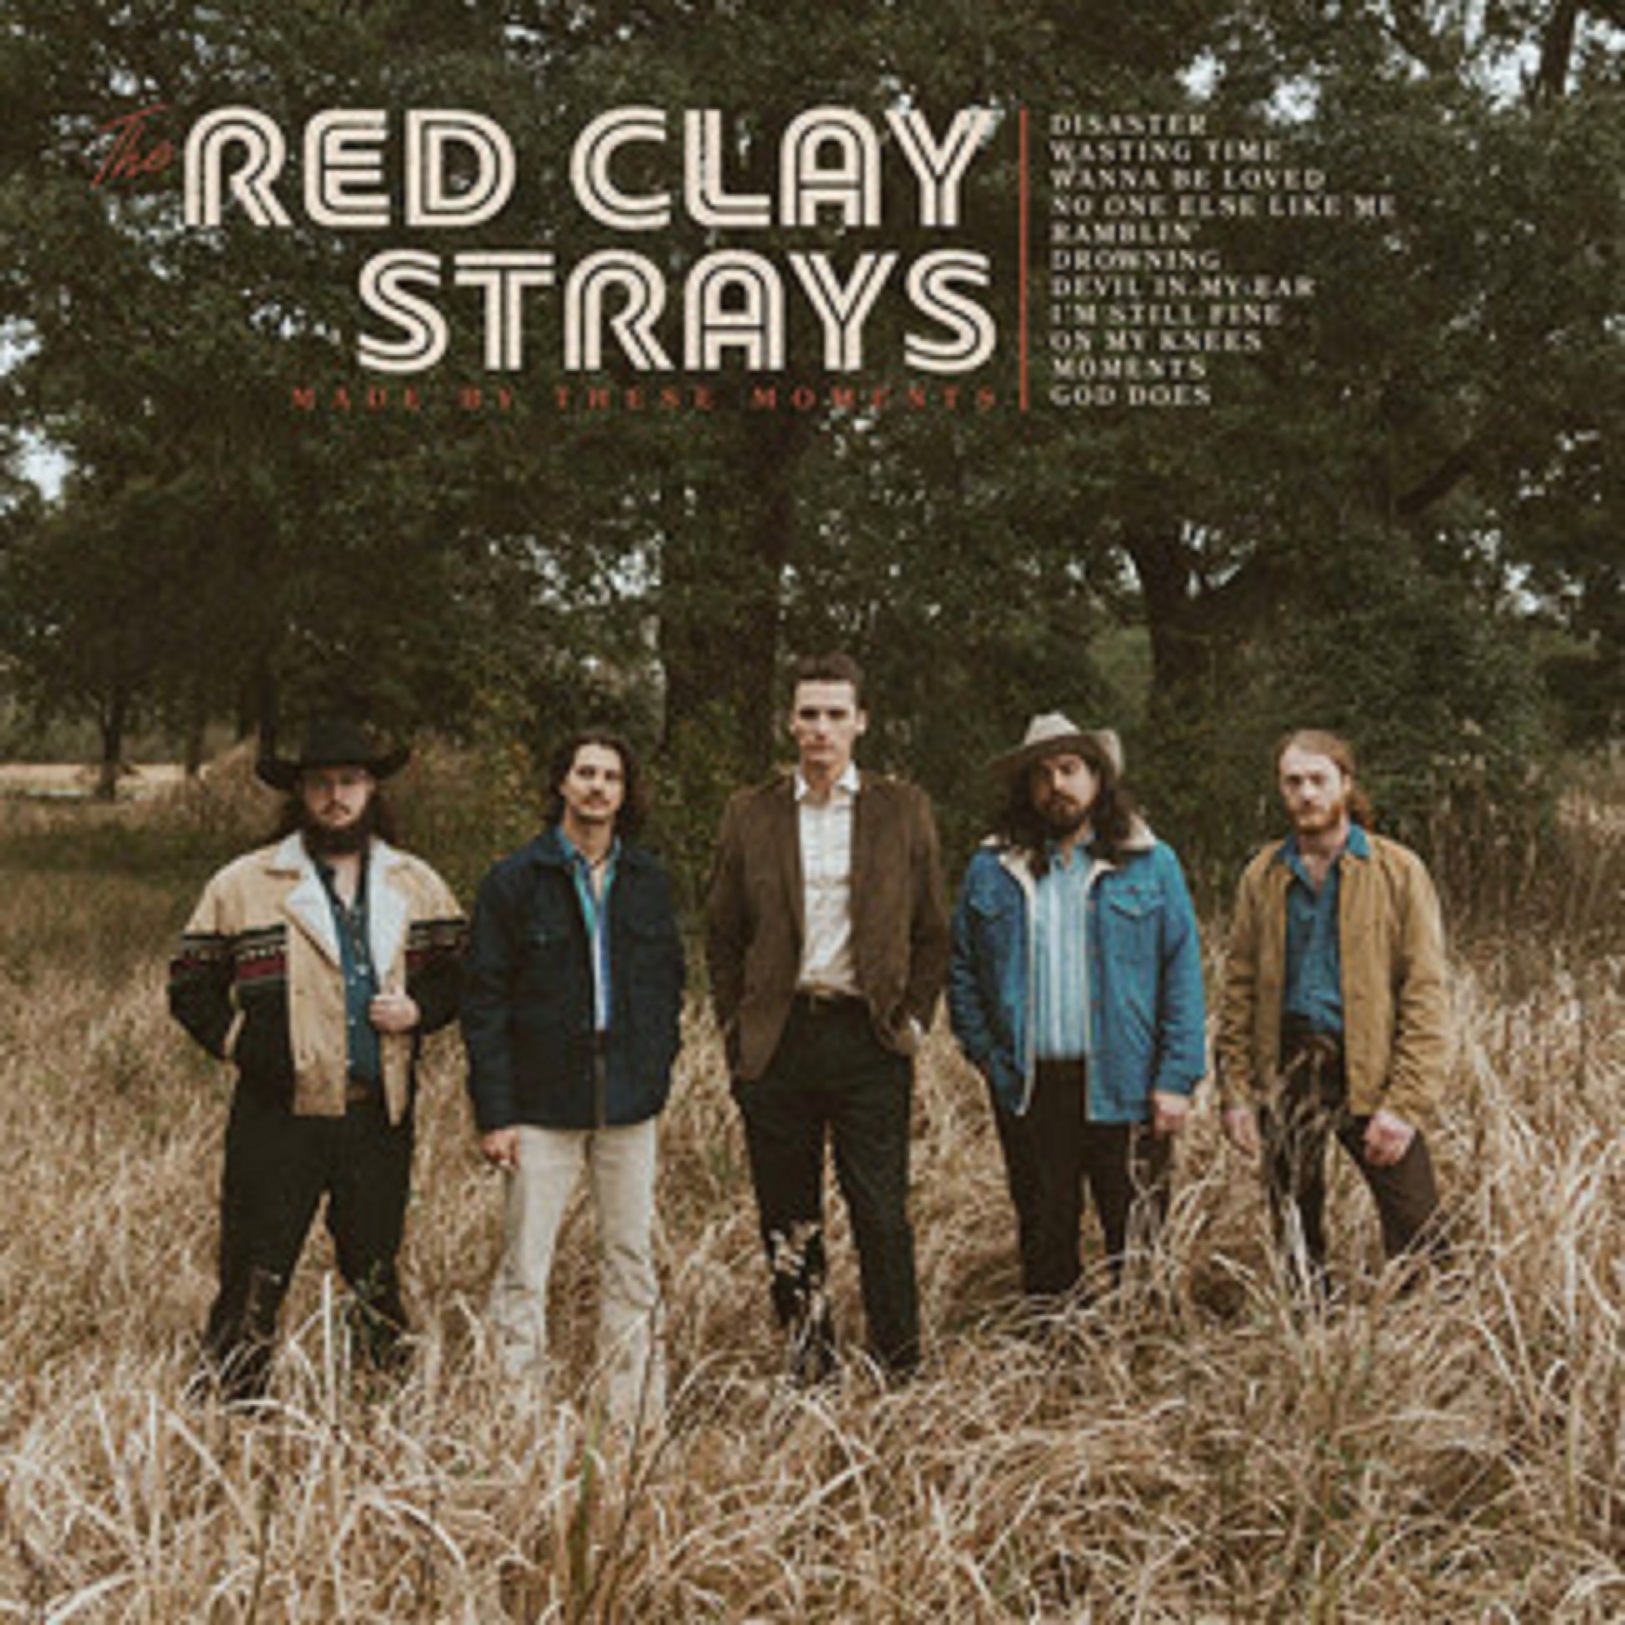 The Red Clay Strays’ new album "Made by These Moments" out today on RCA Records